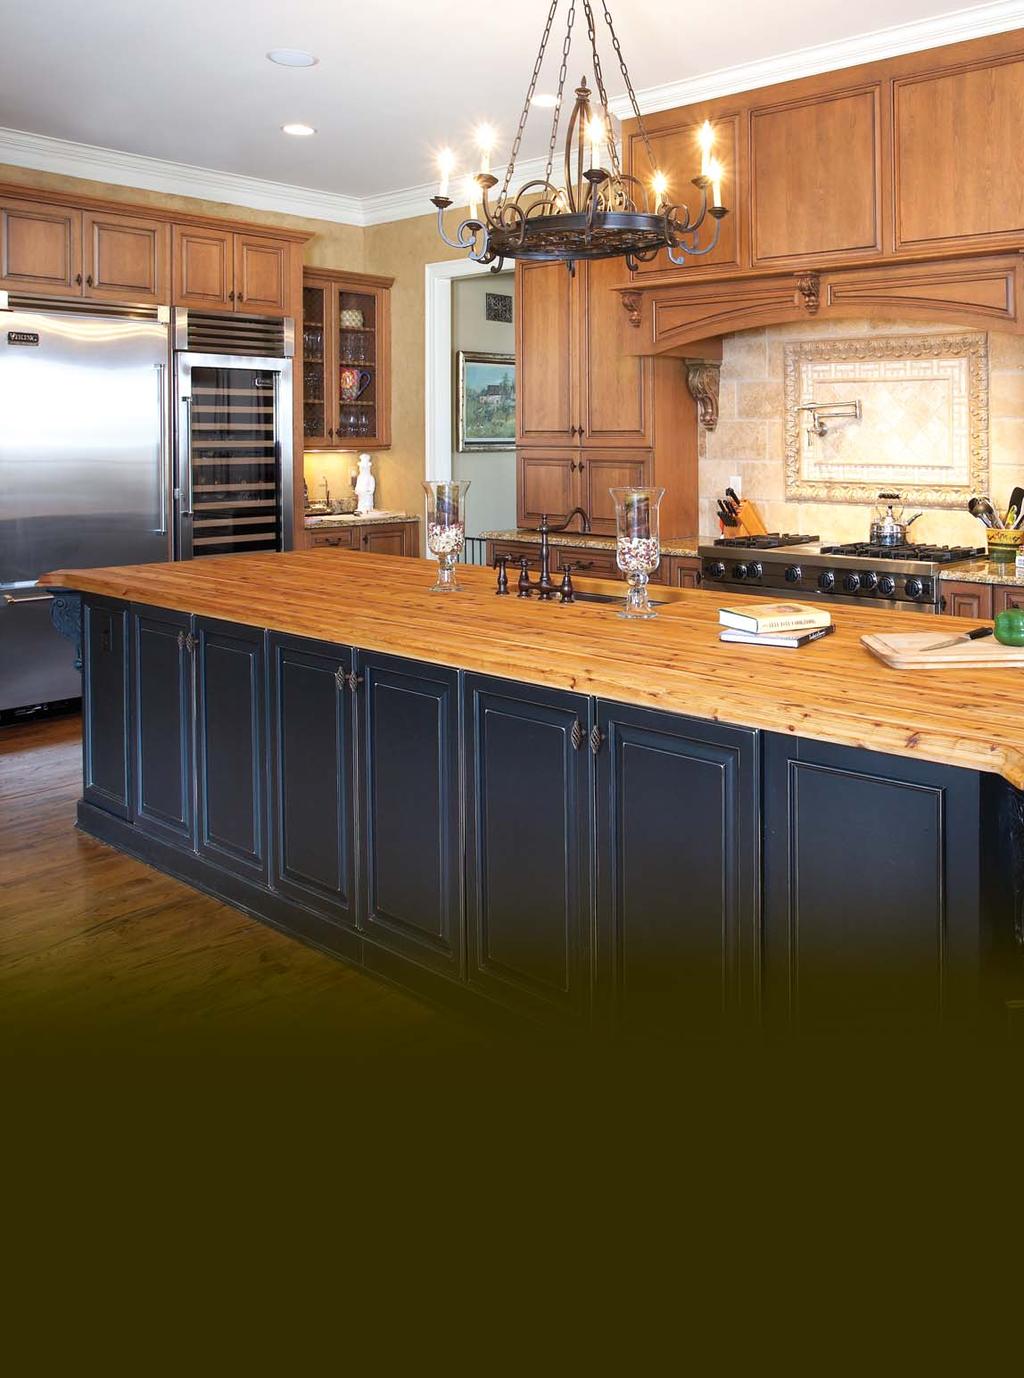 Featured here is a classic kitchen.